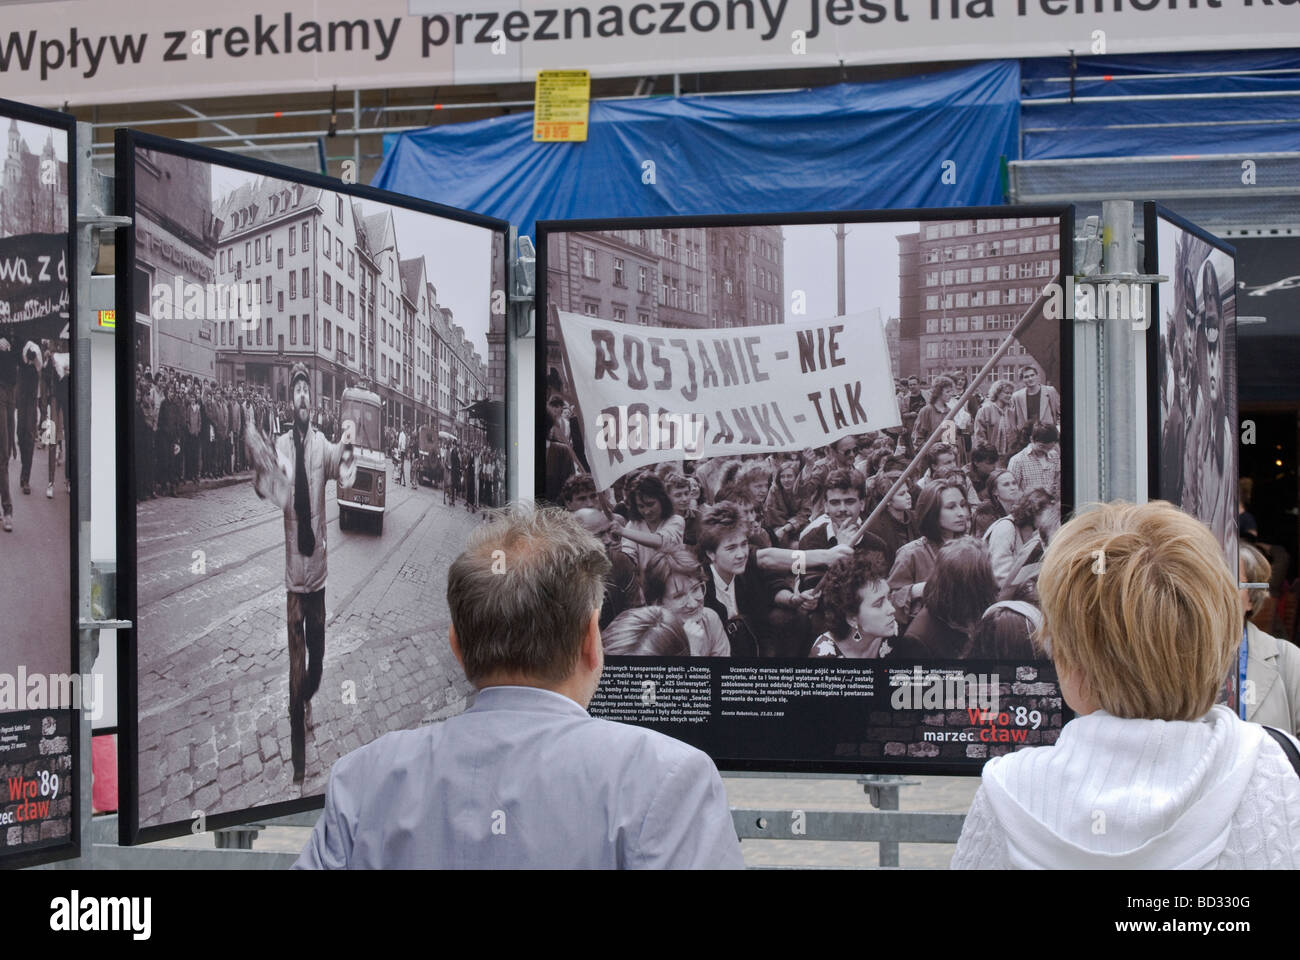 RUSSIAN MEN-NO, RUSSIAN WOMEN-YES, demonstration in Wrocław June 1989 communism collapse, displayed June 2009 in Wrocław Poland Stock Photo